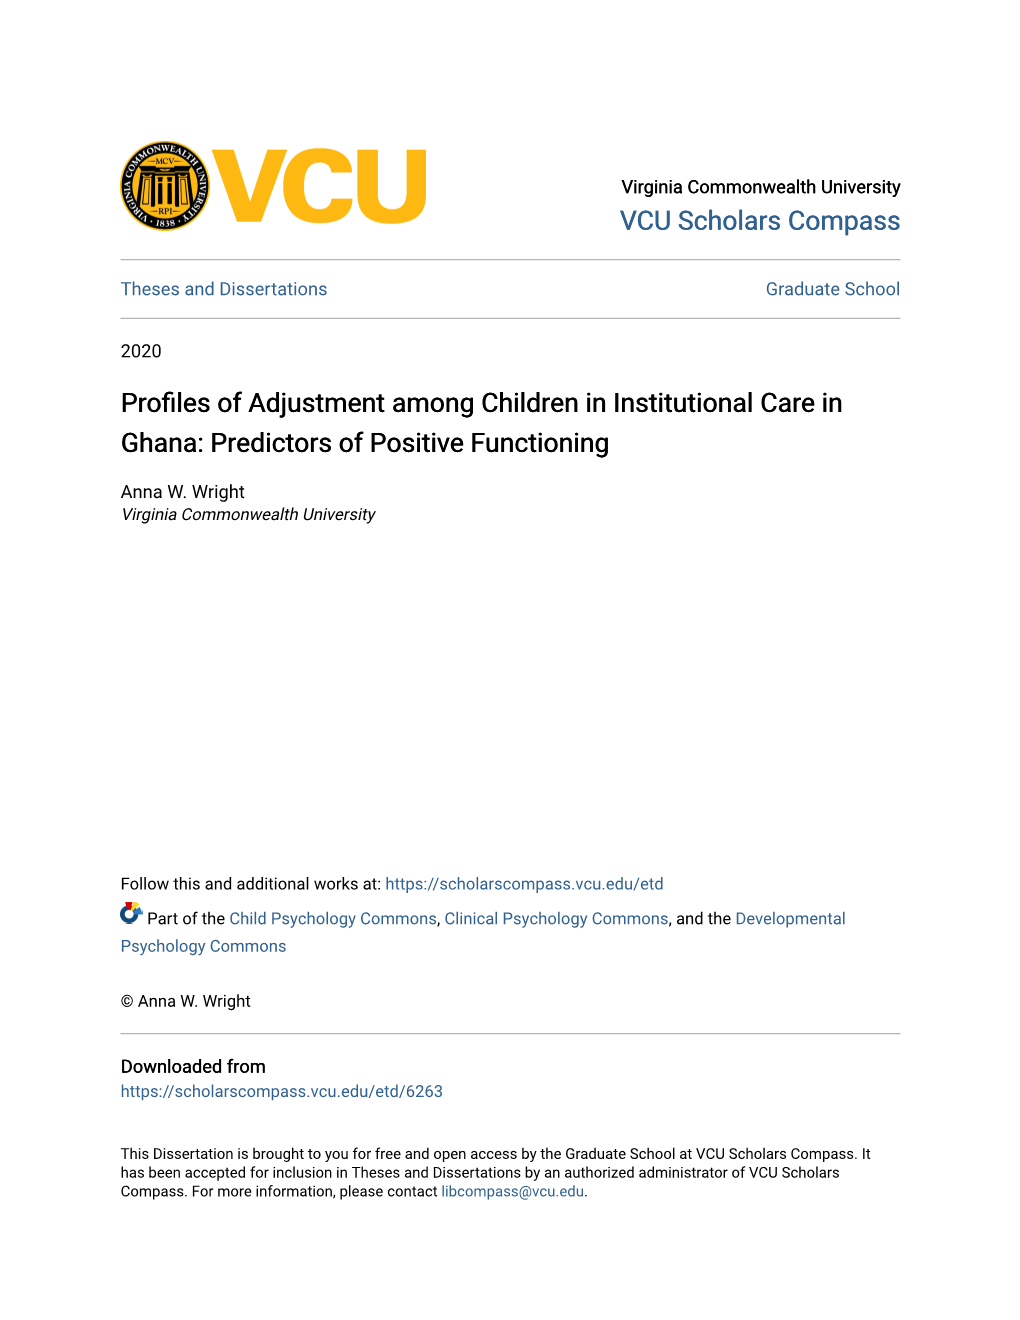 Profiles of Adjustment Among Children in Institutional Care in Ghana: Predictors of Positive Functioning